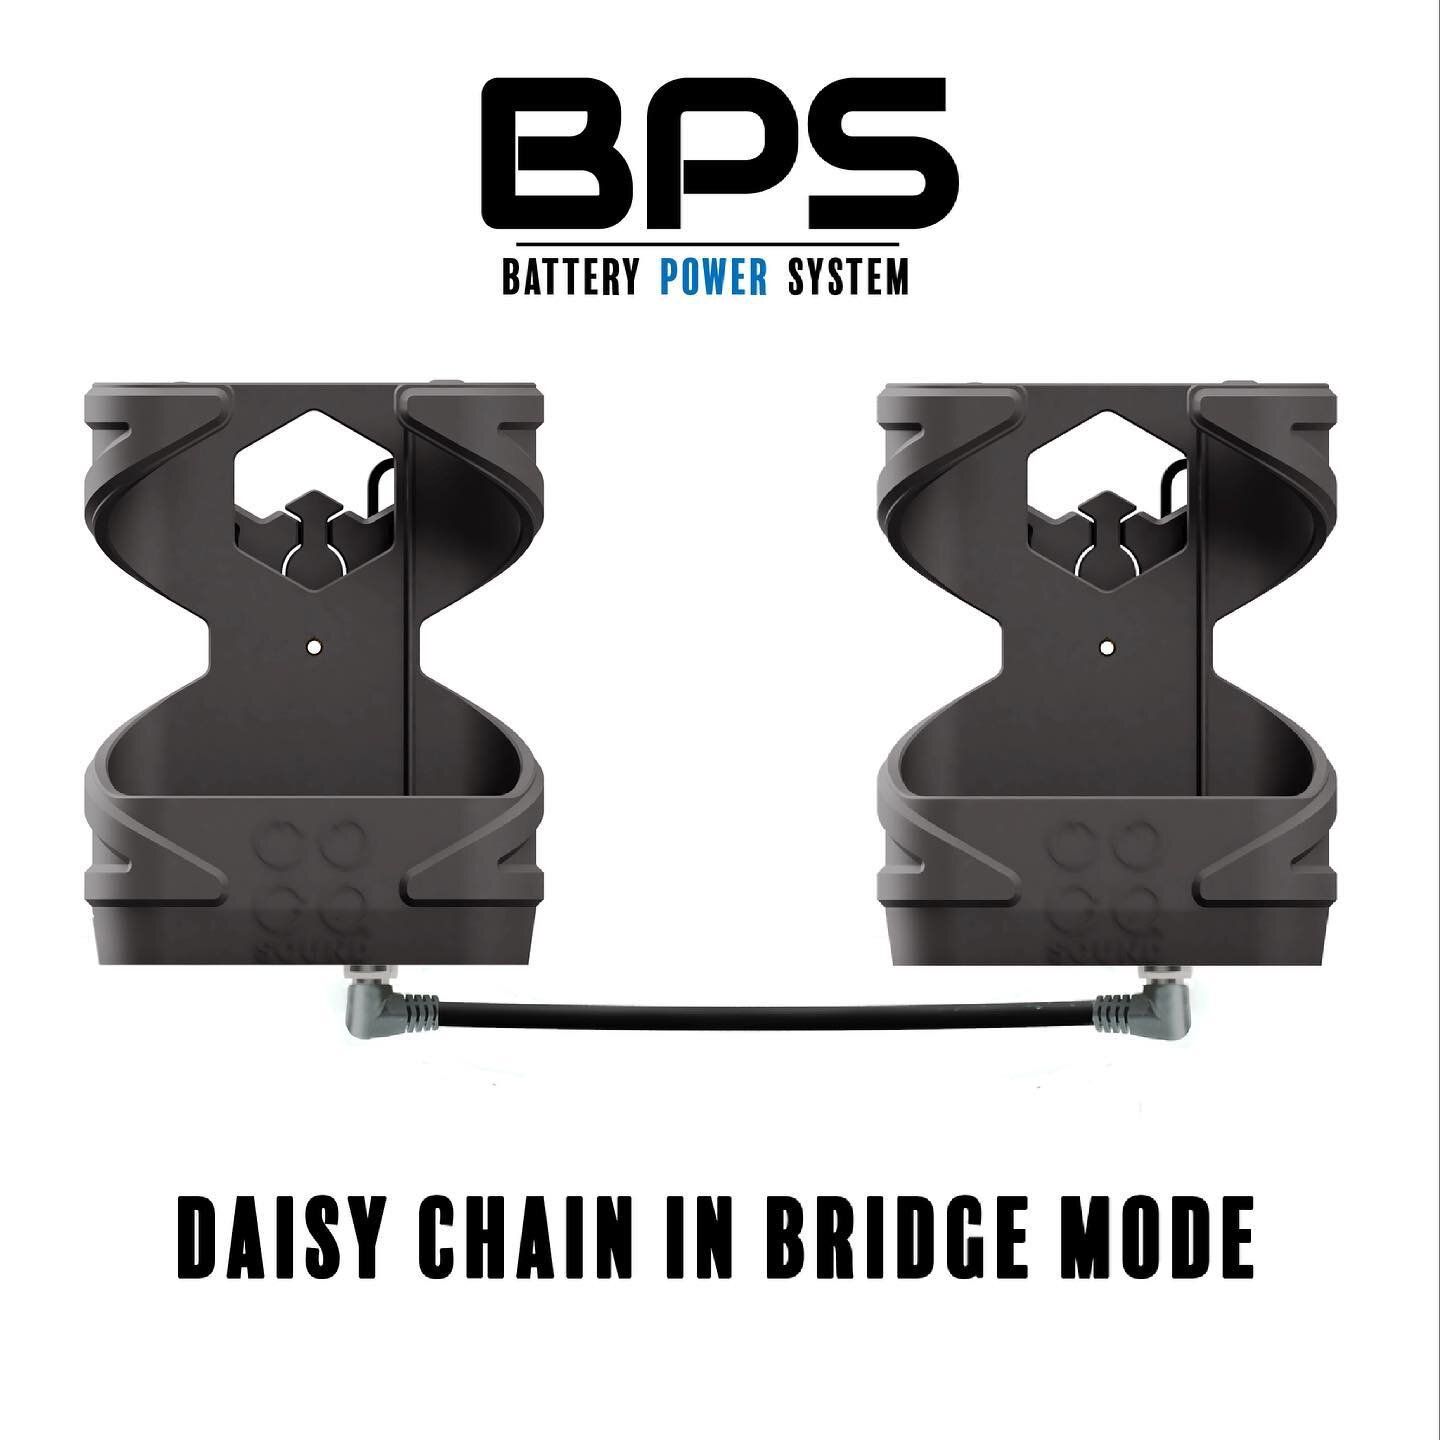 Battery Power Systems can be daisy chained together with Bridge Mode! 
.
Expand Outputs
.
Hot-Swap Batteries
.
Provide Redundant Power
.
#cogasound #bps #batterypowersystem #engmixer #soundmixer #sound #power #soundpower #boomop #soundutility #neverl